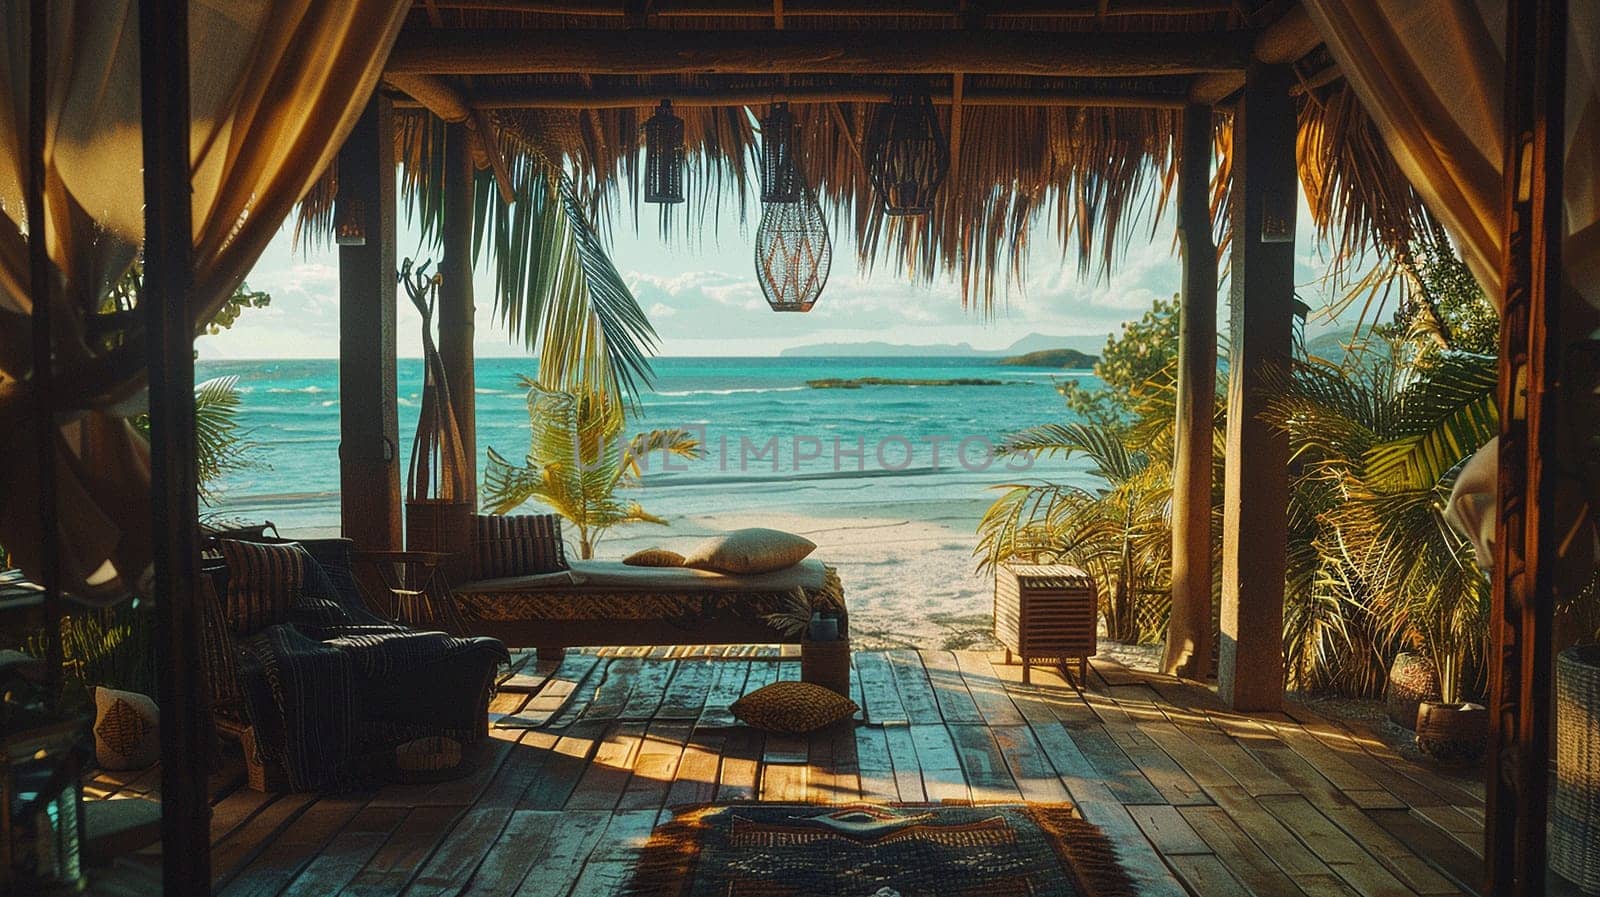 Beautiful beach interior scene of a luxury room by the sea. Recreation, chillout, nature by NeuroSky